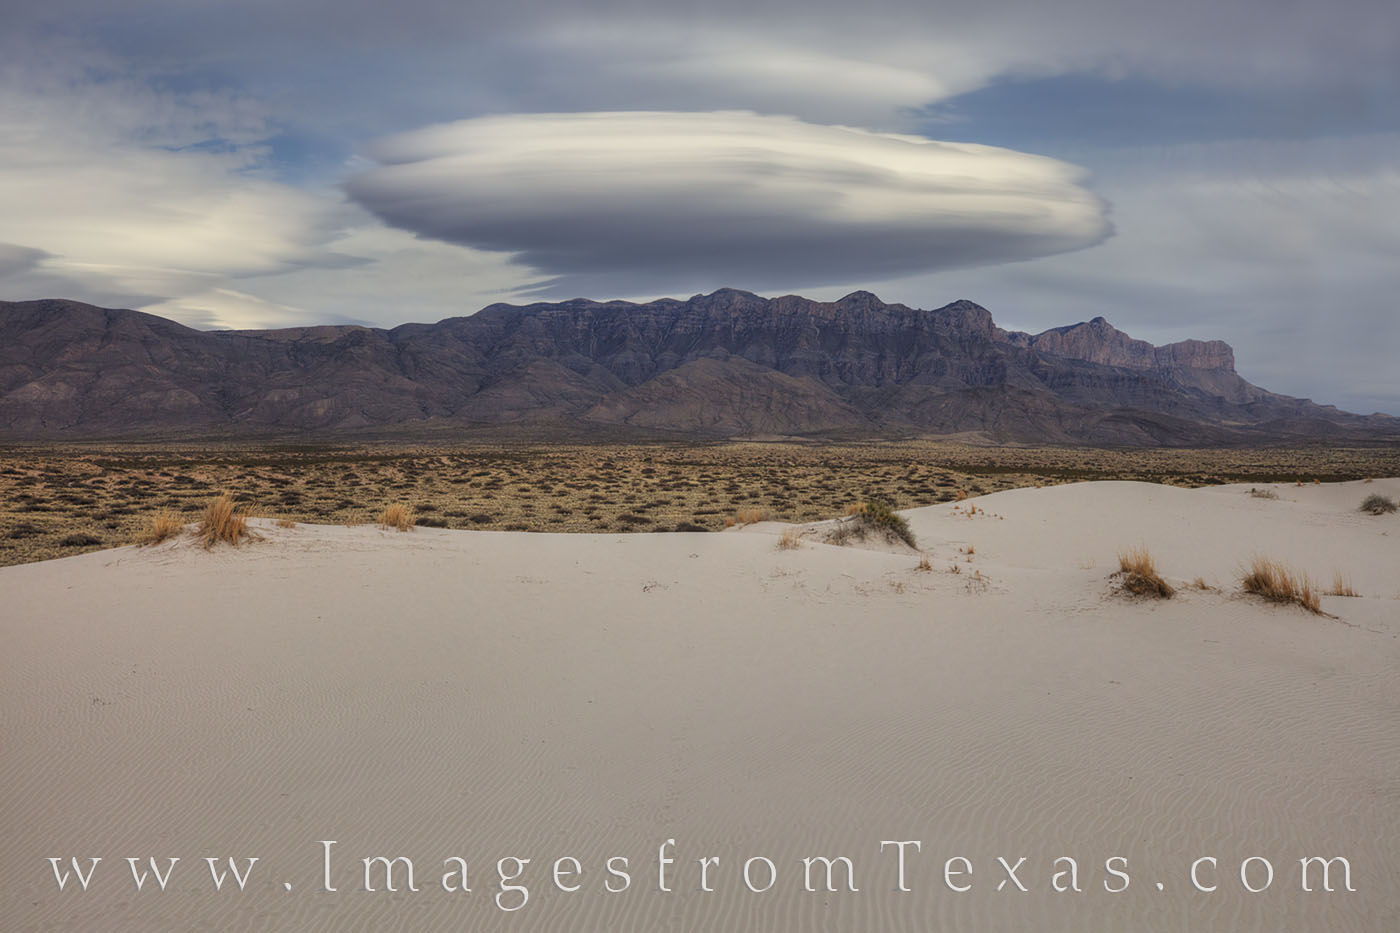 This lenticular cloud that formed over the Guadalupe Mountains on an afternoon in March was serendipitous moment. I had driven...